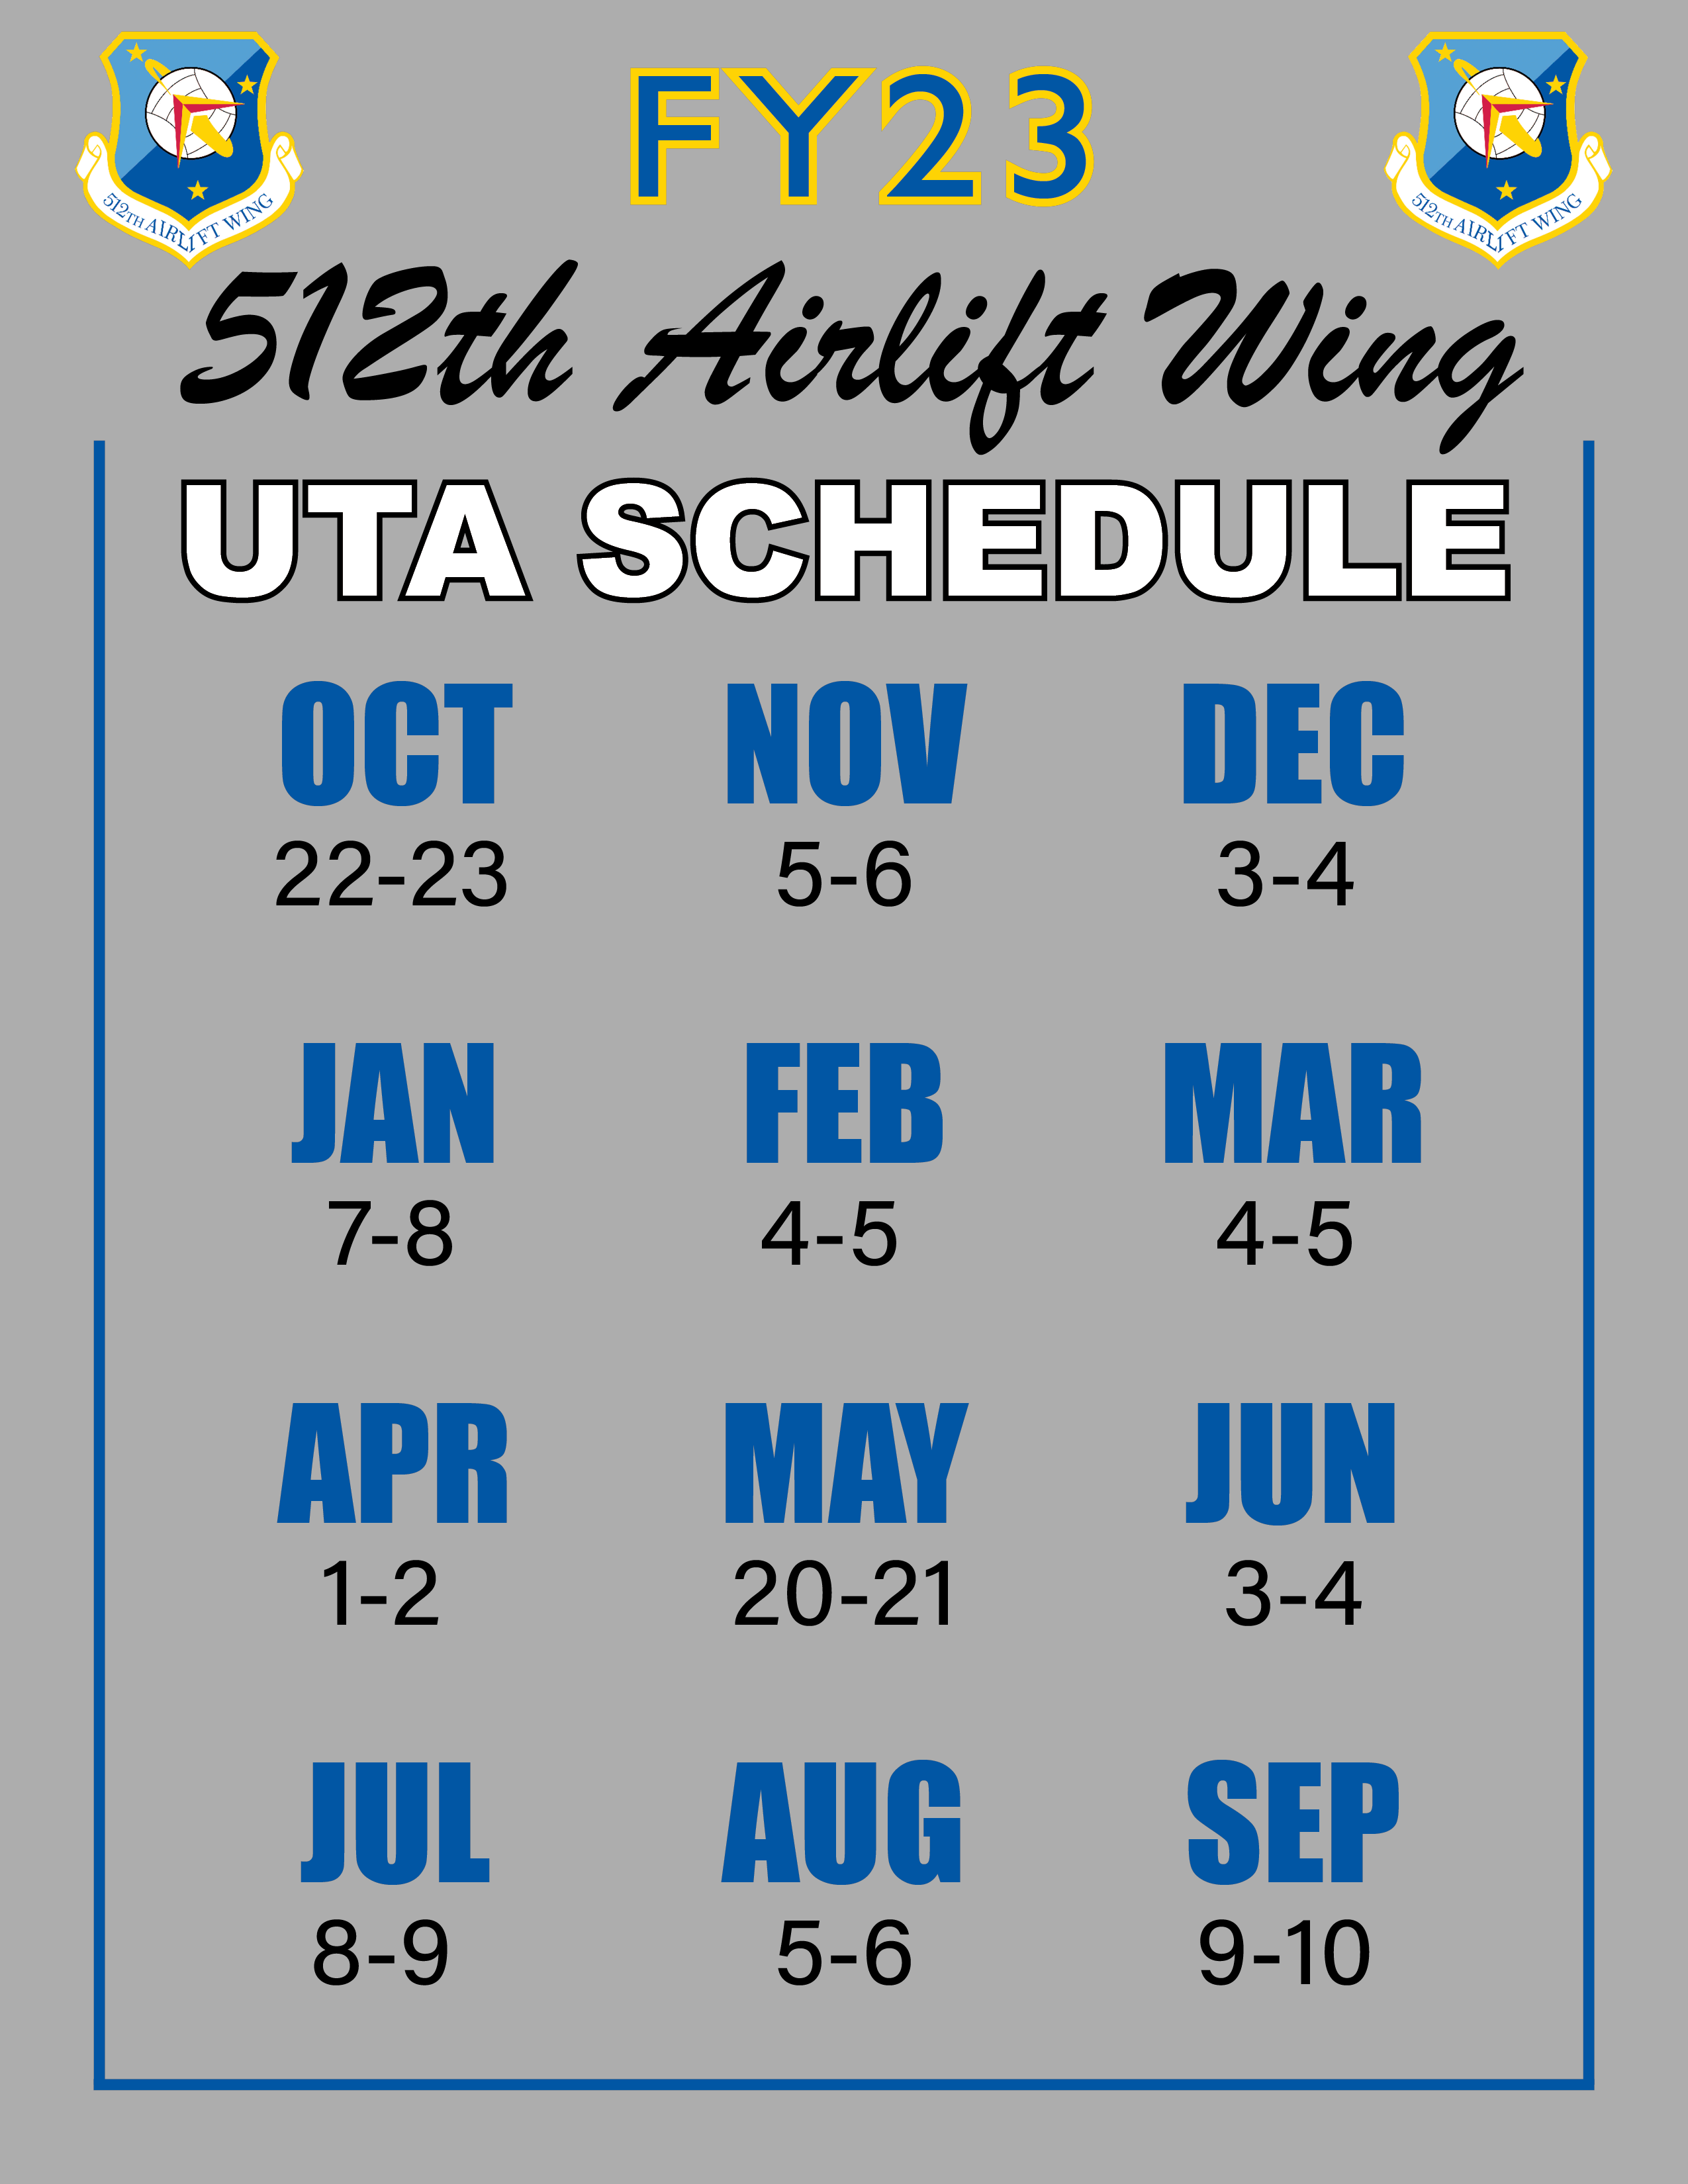 graphic of fiscal year 2023 UTA schedule